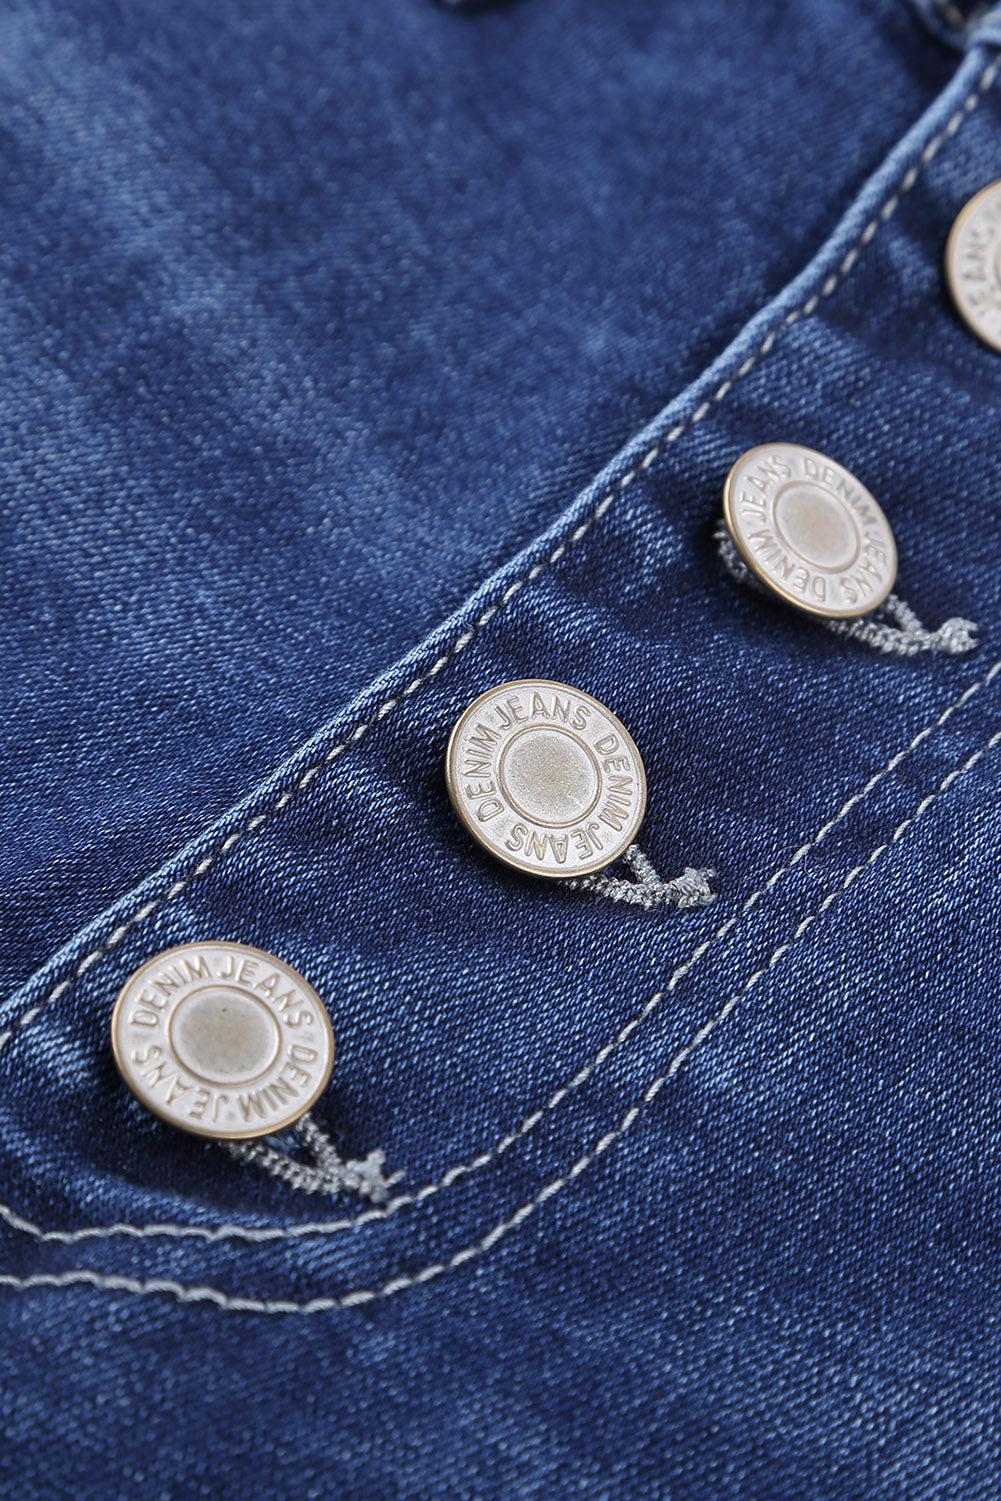 What You Want Button Fly Pocket Jeans-JEANS 0-16-[Adult]-[Female]-2022 Online Blue Zone Planet